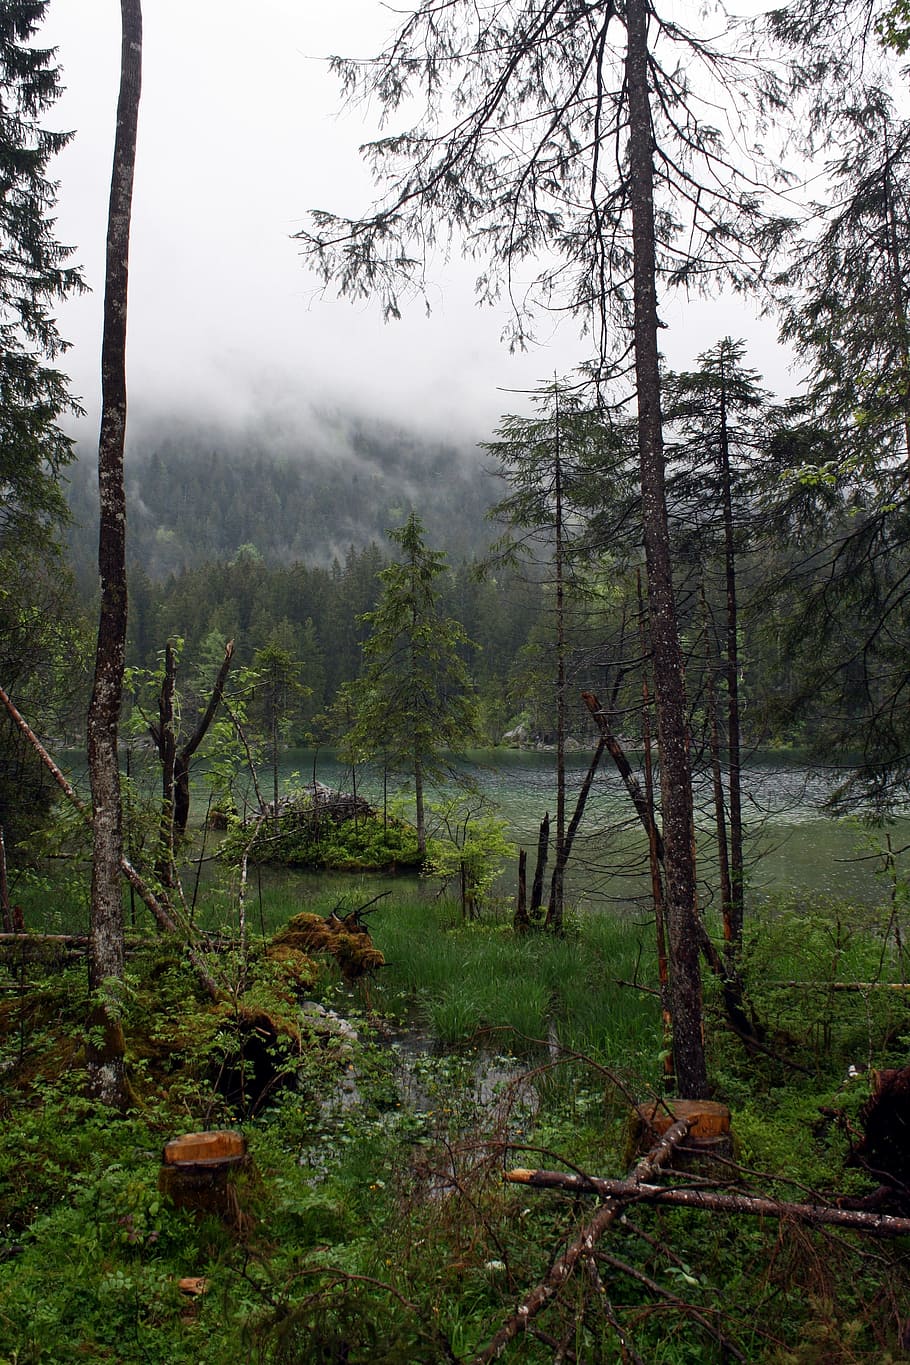 Lost, Fairy Tale Forest, Mystical, lost places, magic, ghostly, haunting, fog, witches, lake